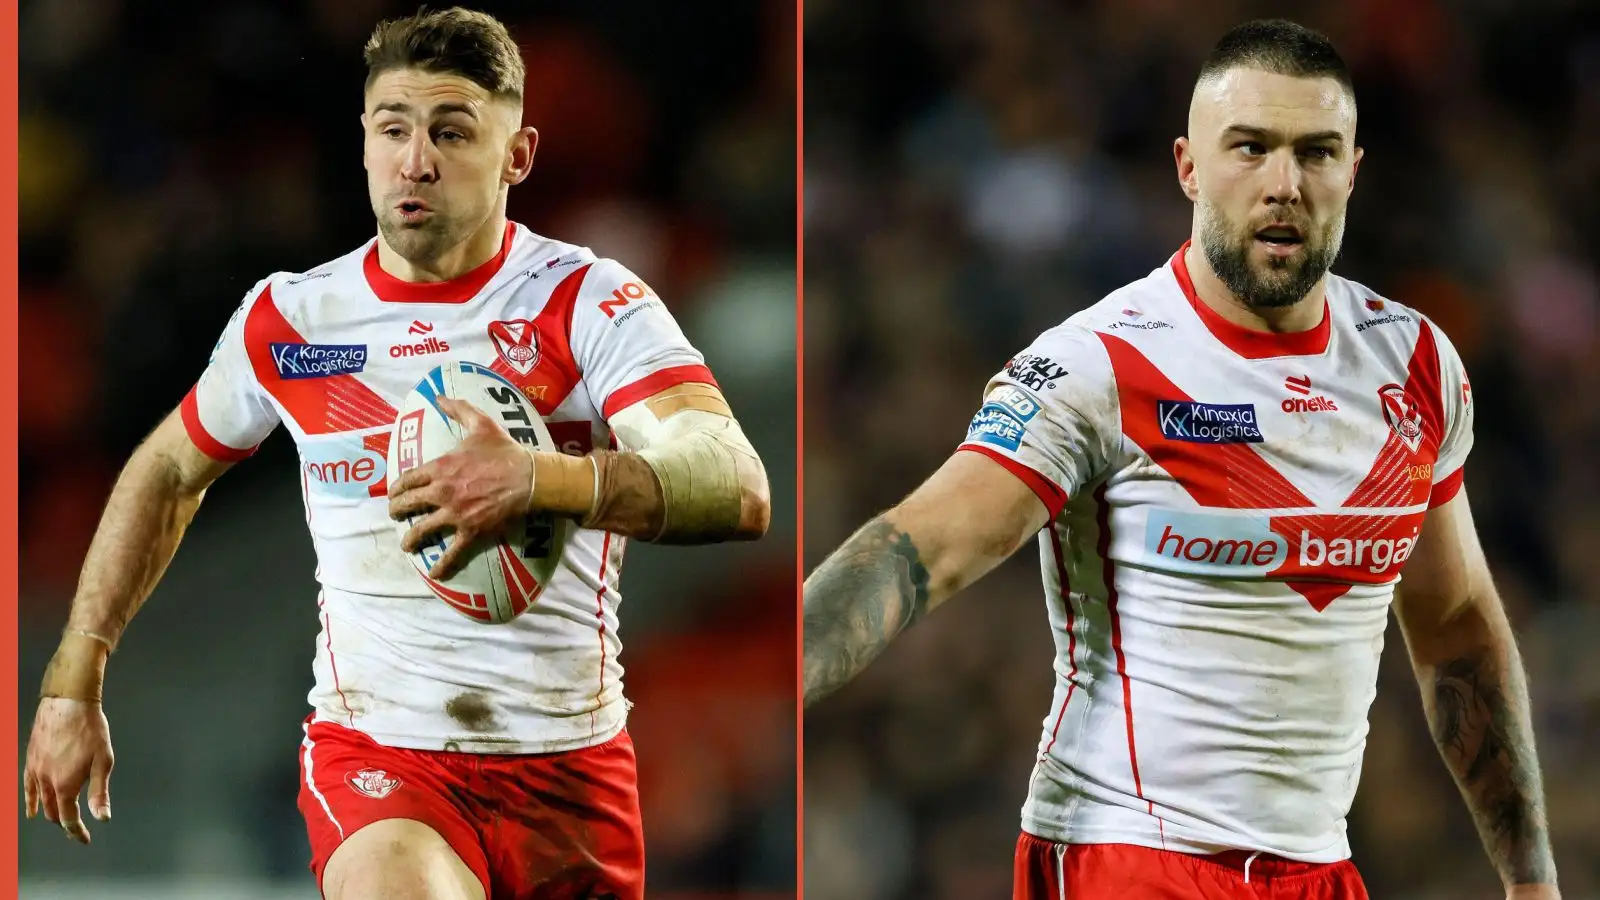 St Helens boss Paul Wellens provides injury latest on Tommy Makinson and Curtis Sironen